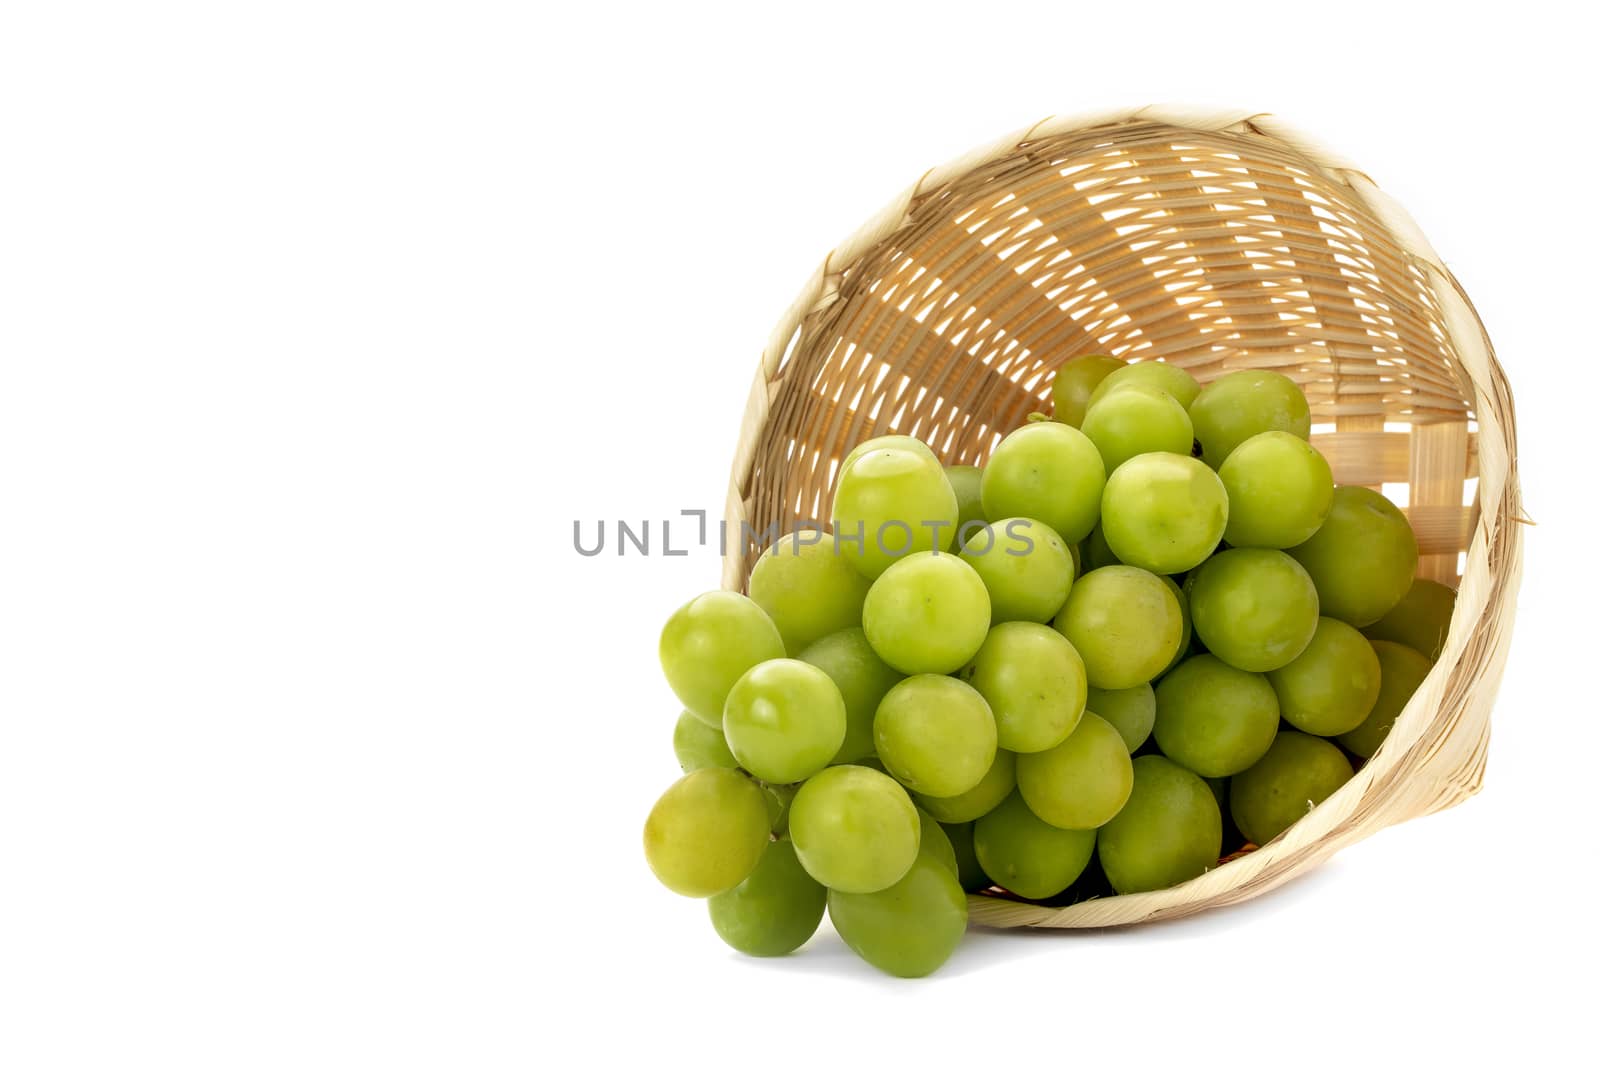 A bunch of green grapes in a weave bamboo basket. Isolated on white background.